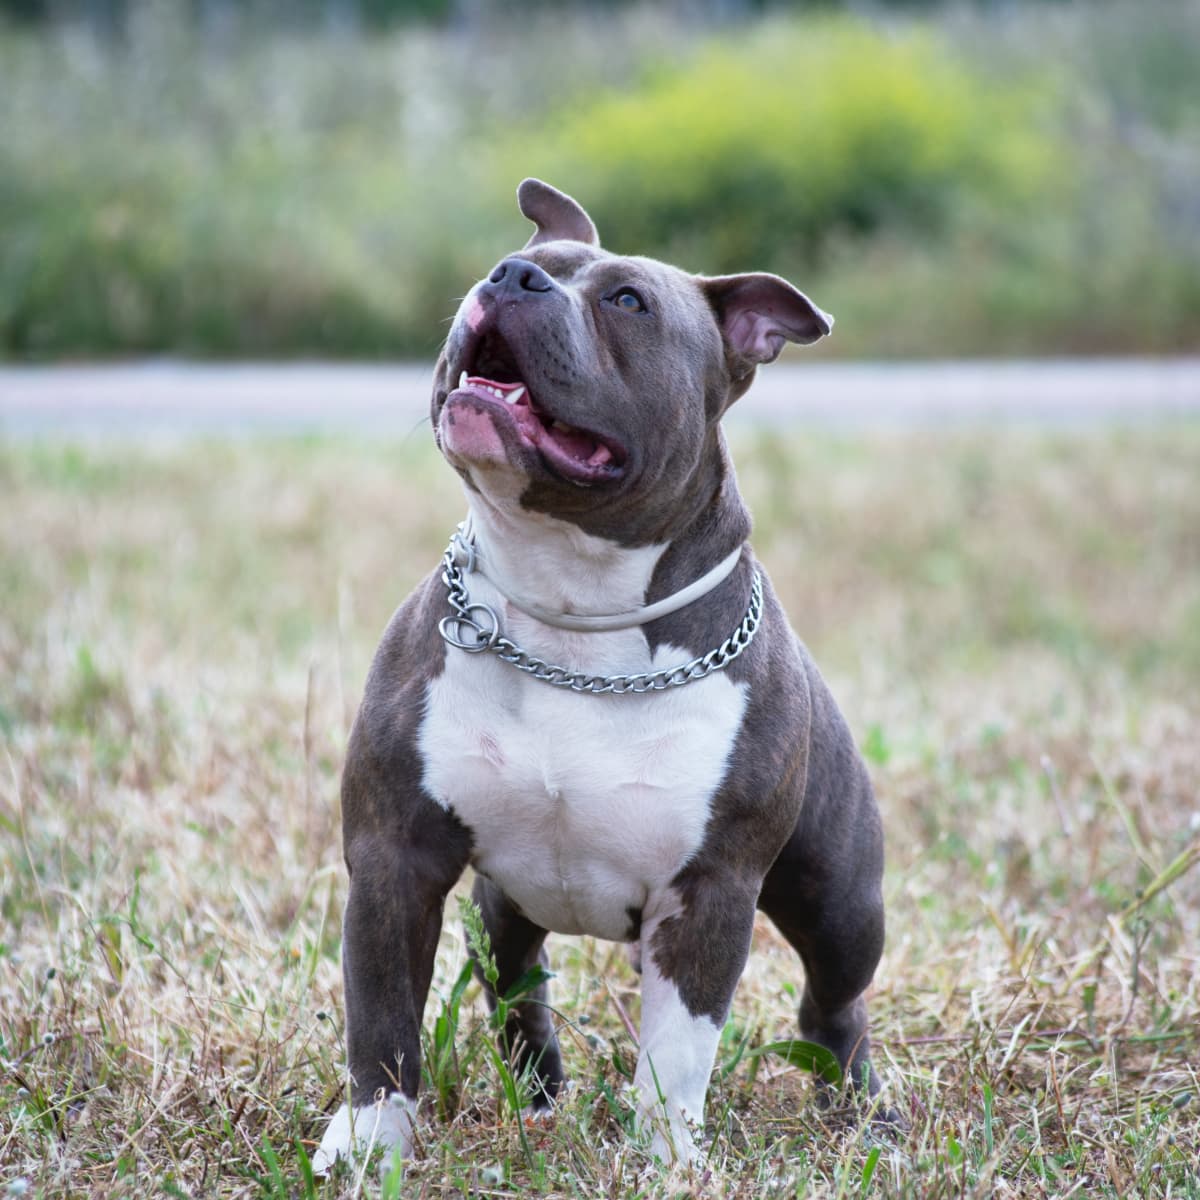 About Blue Nose and Nose Pit Bulls -